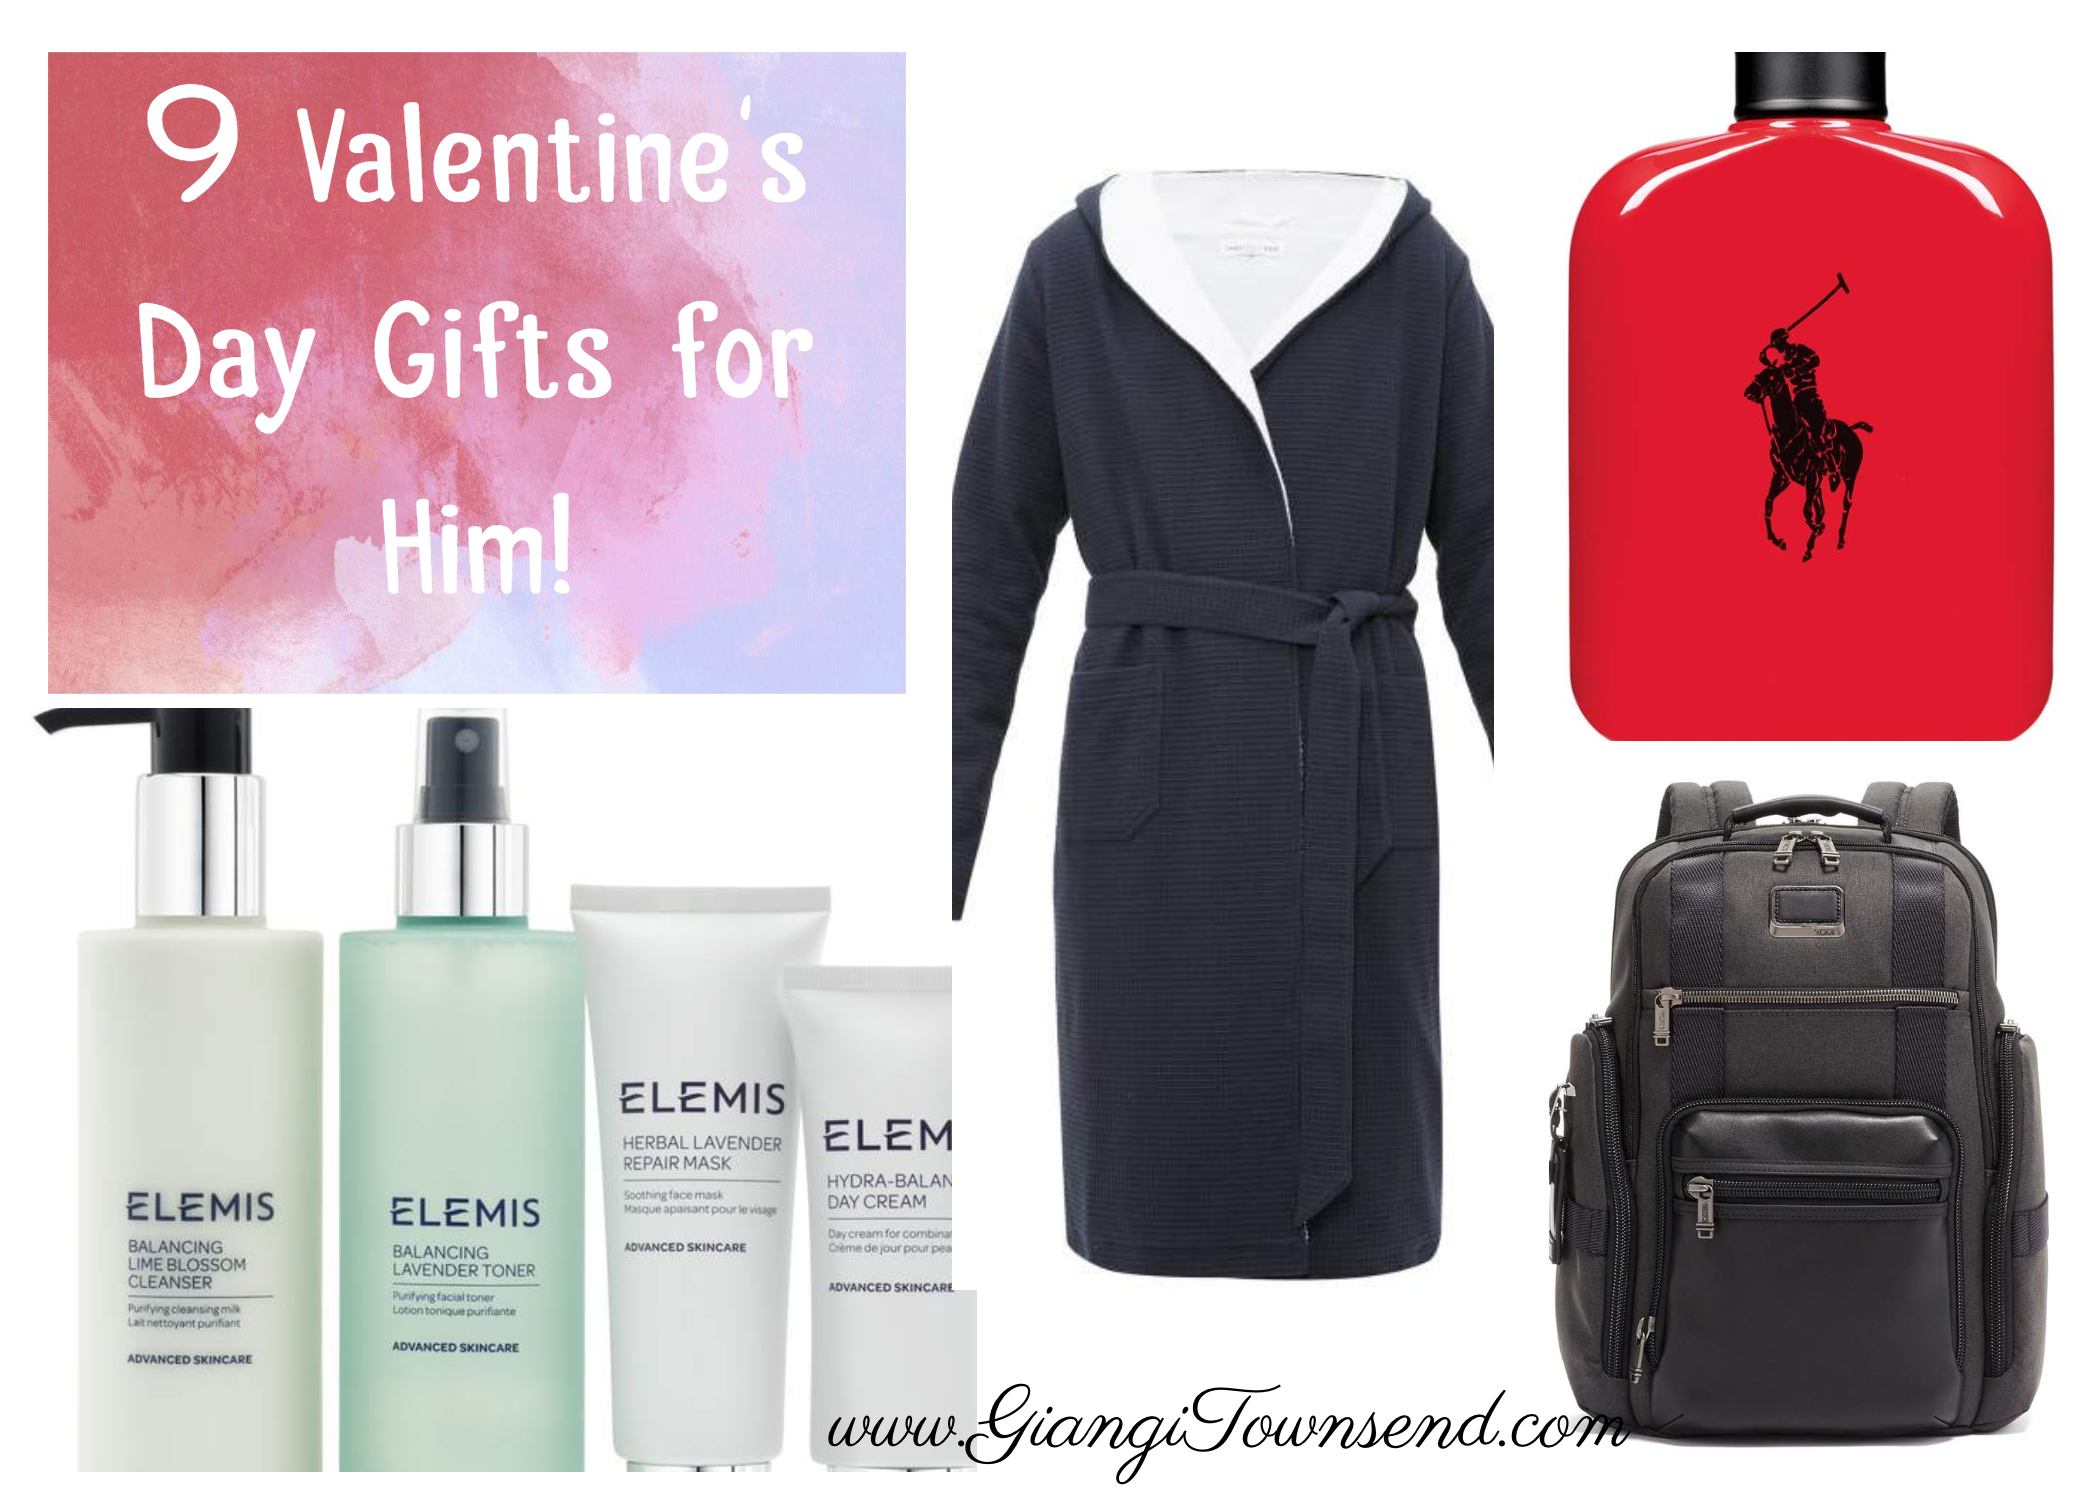 9 Valentine’s Day Gifts for Your Boyfriend or Husband